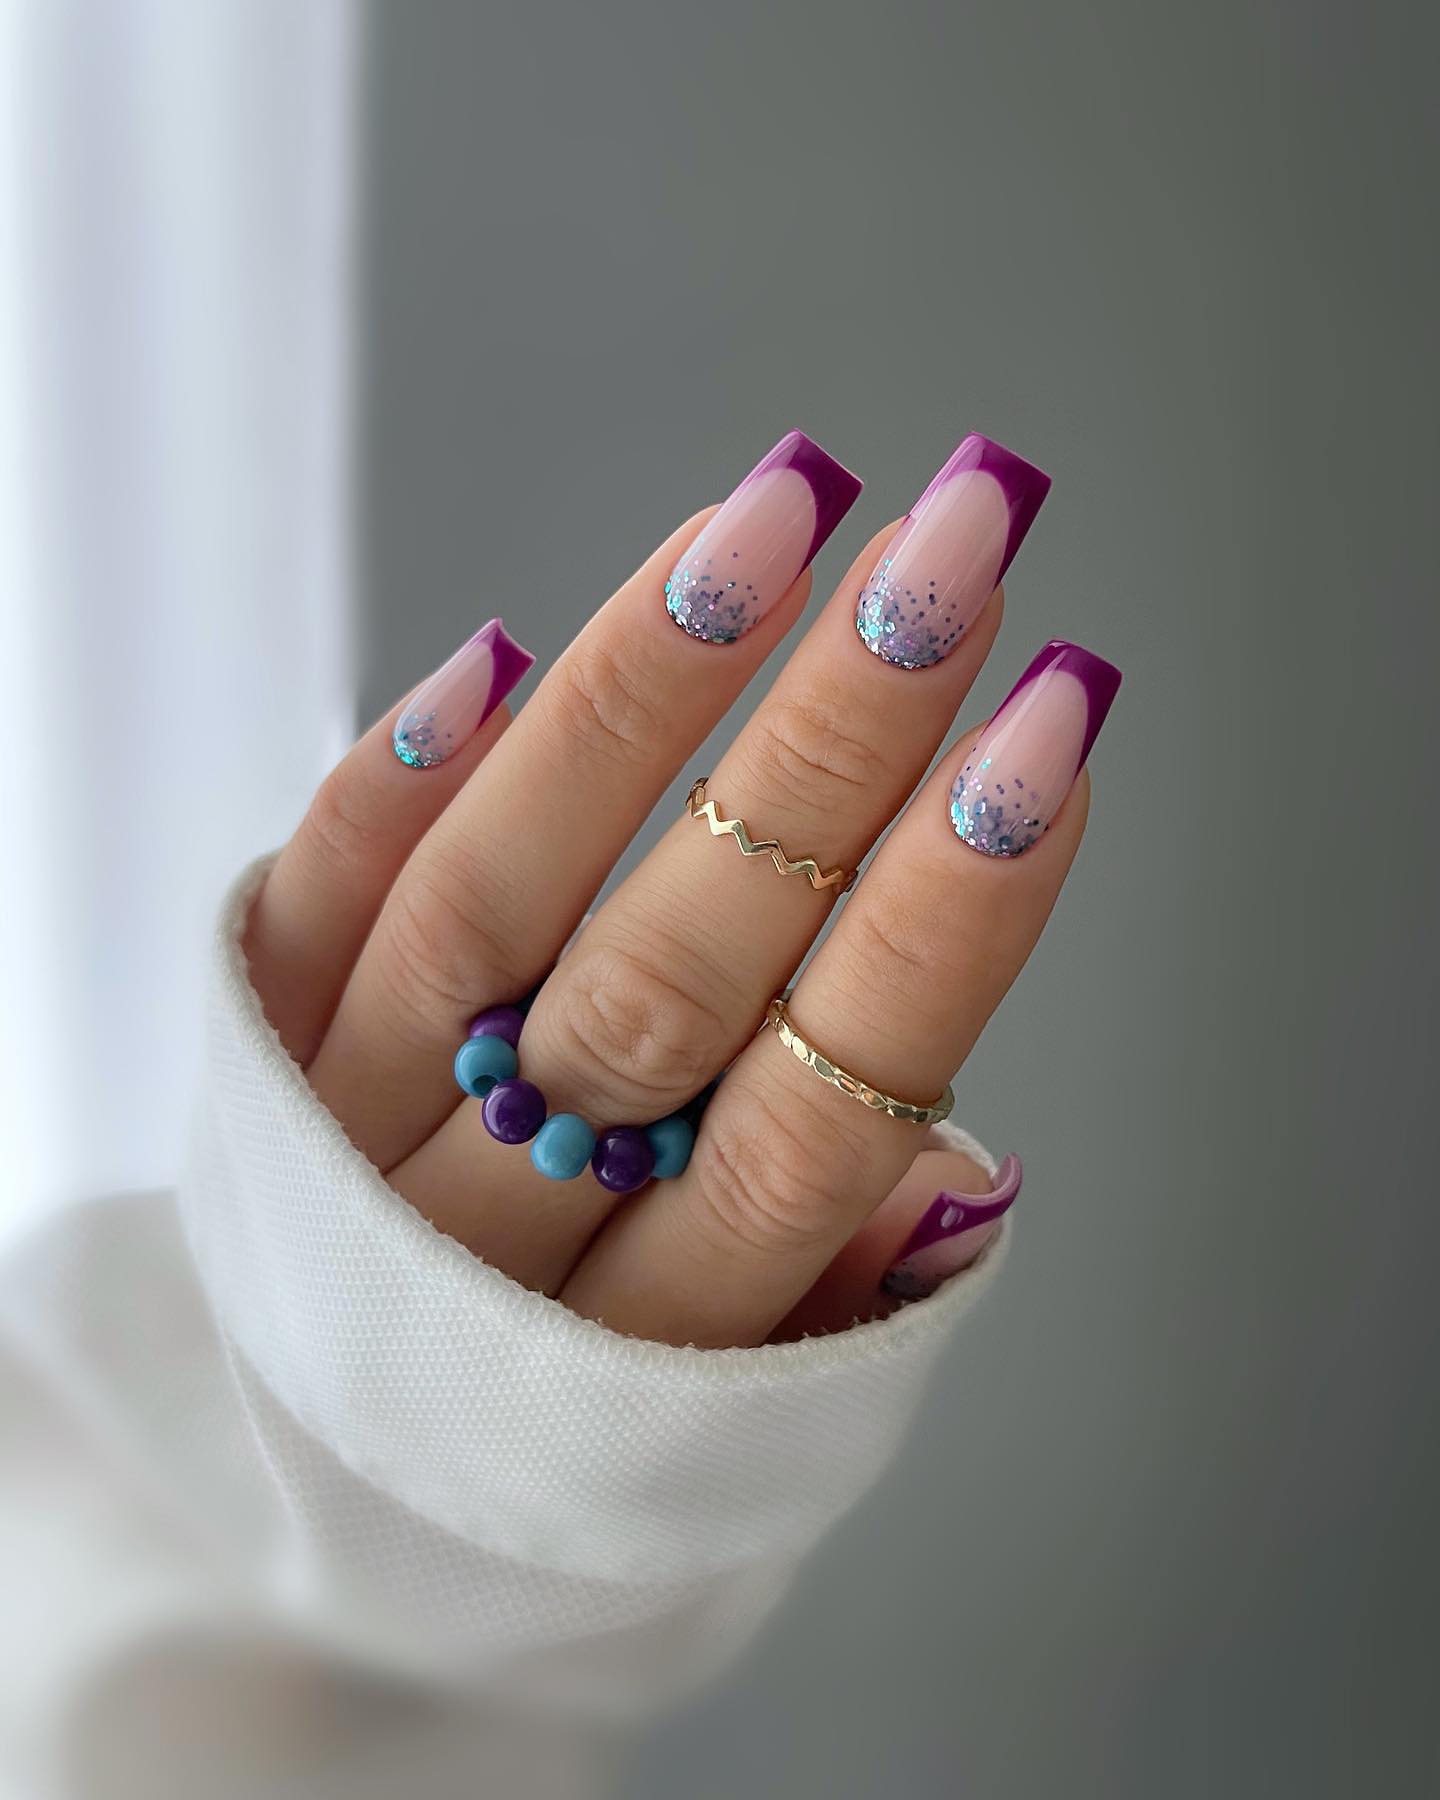 100+ Best Winter Nail Ideas And Designs To Try images 46